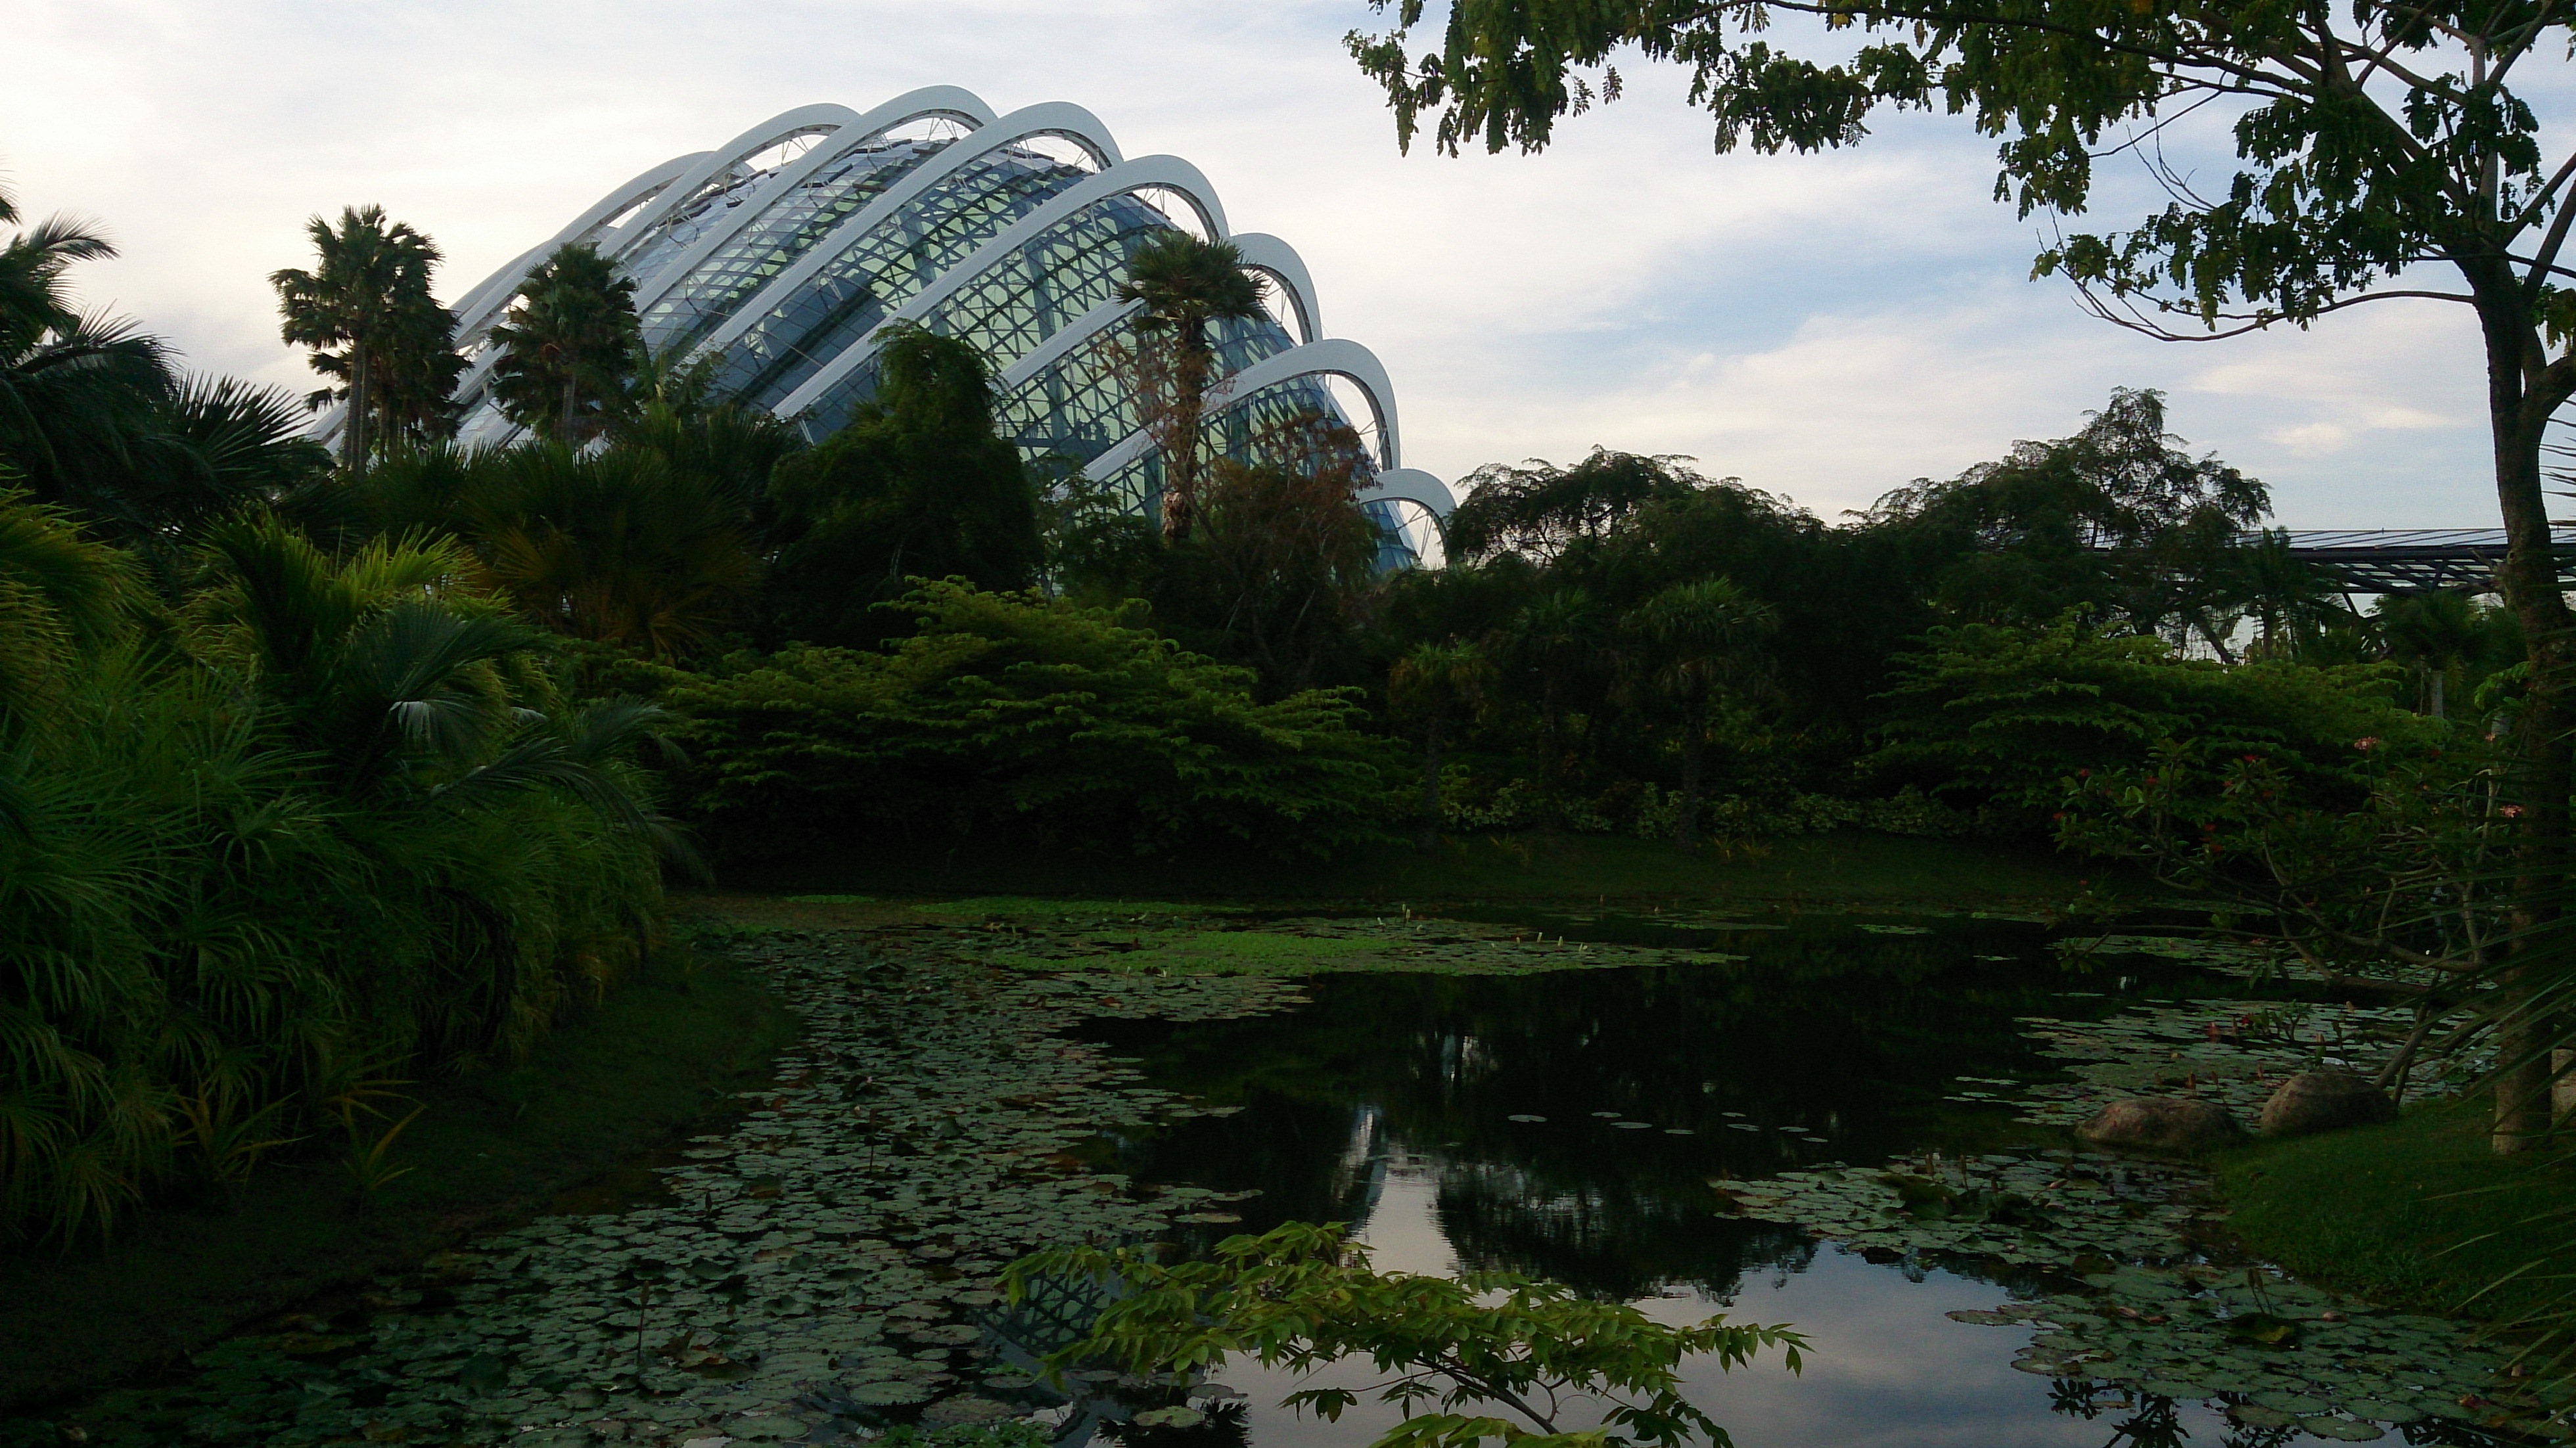 File:Flower dome at gardens by the bay, Singapore 2.jpg ...